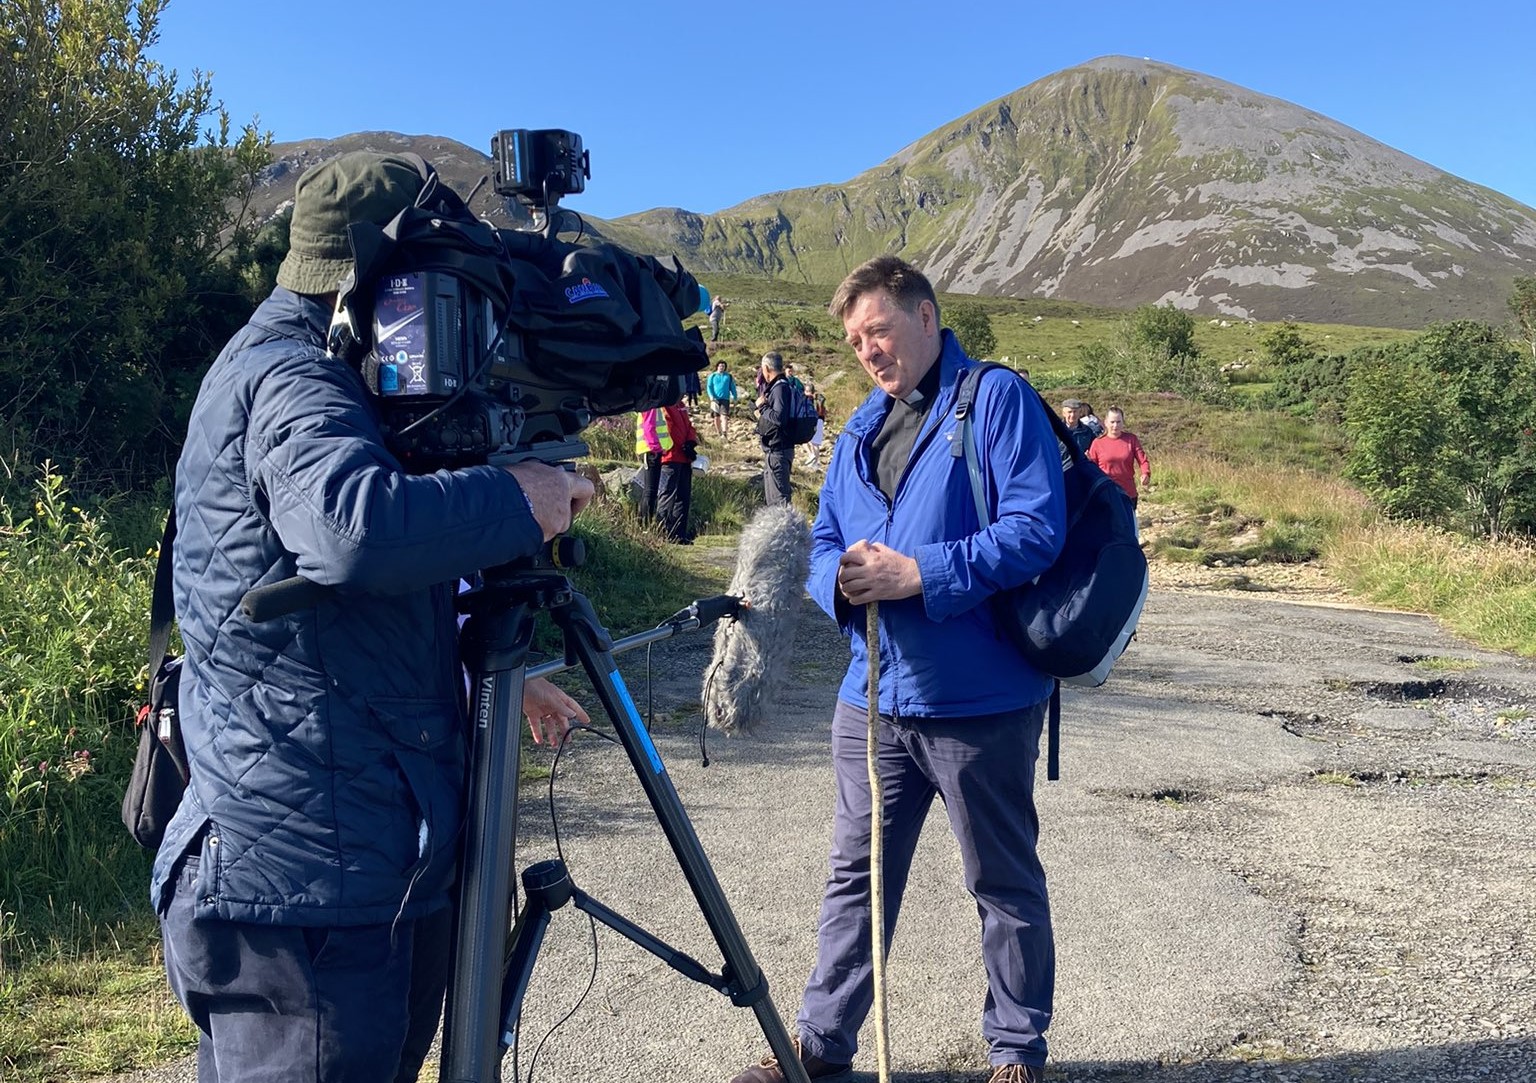 Archbishop Francis Duffy of Tuam being interviewed by RTE ahead of joining pilgrims to climb Croagh Patrick on Reek Sunday 2022.